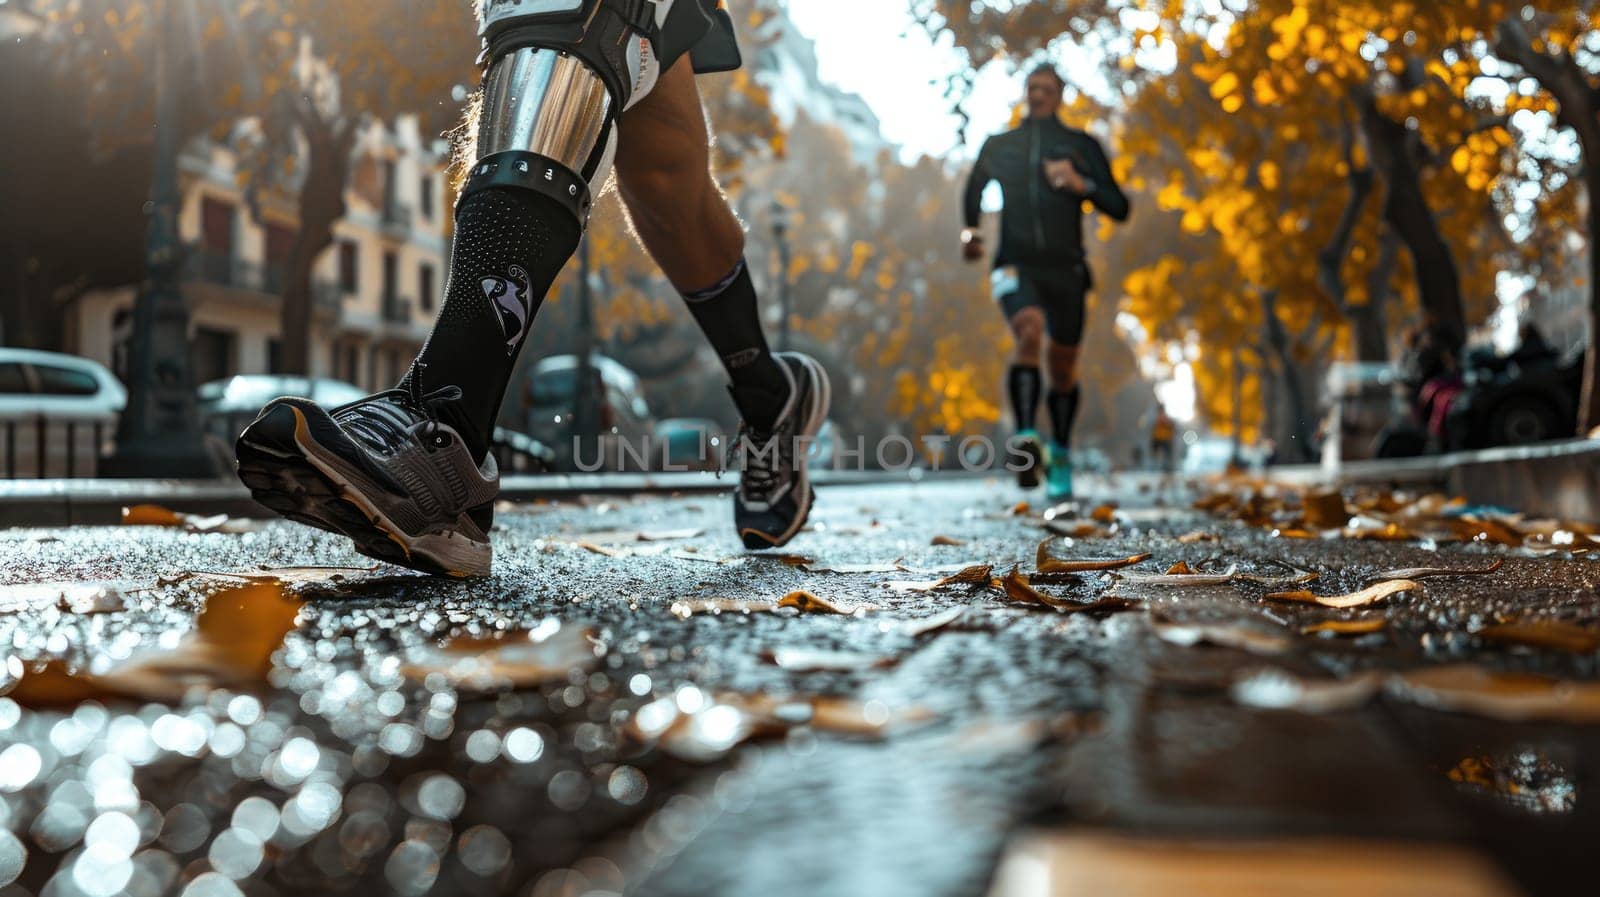 Determined athlete with prosthetic leg running in a competitive marathon race..